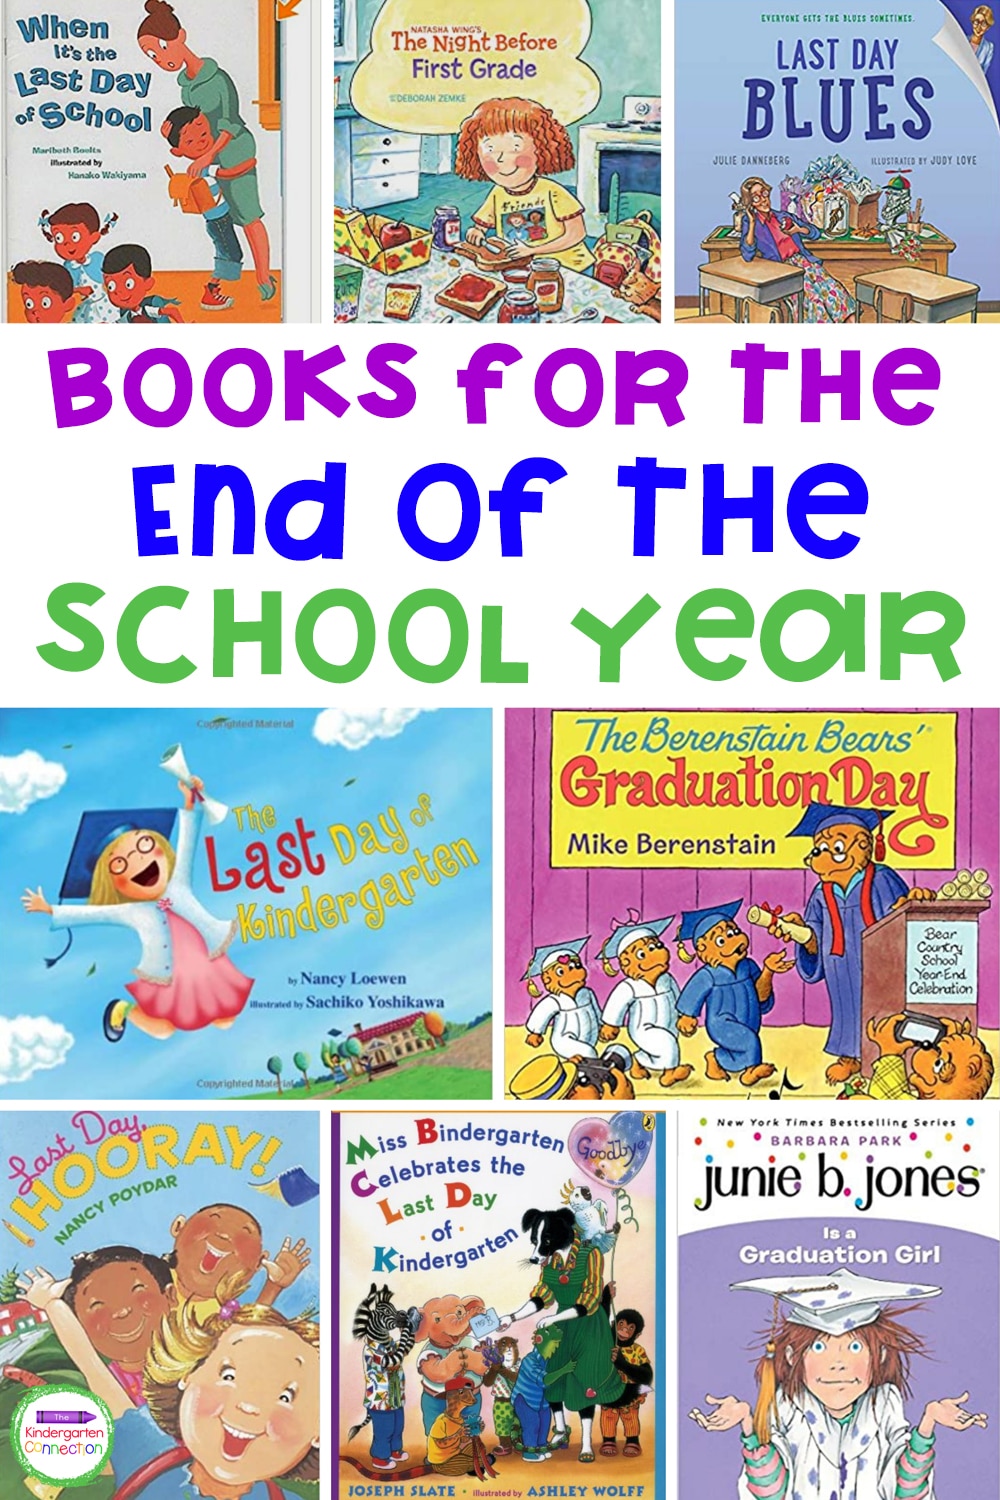 With summer break quickly approaching, these Kindergarten books for the end of the school year will help keep your students engaged!